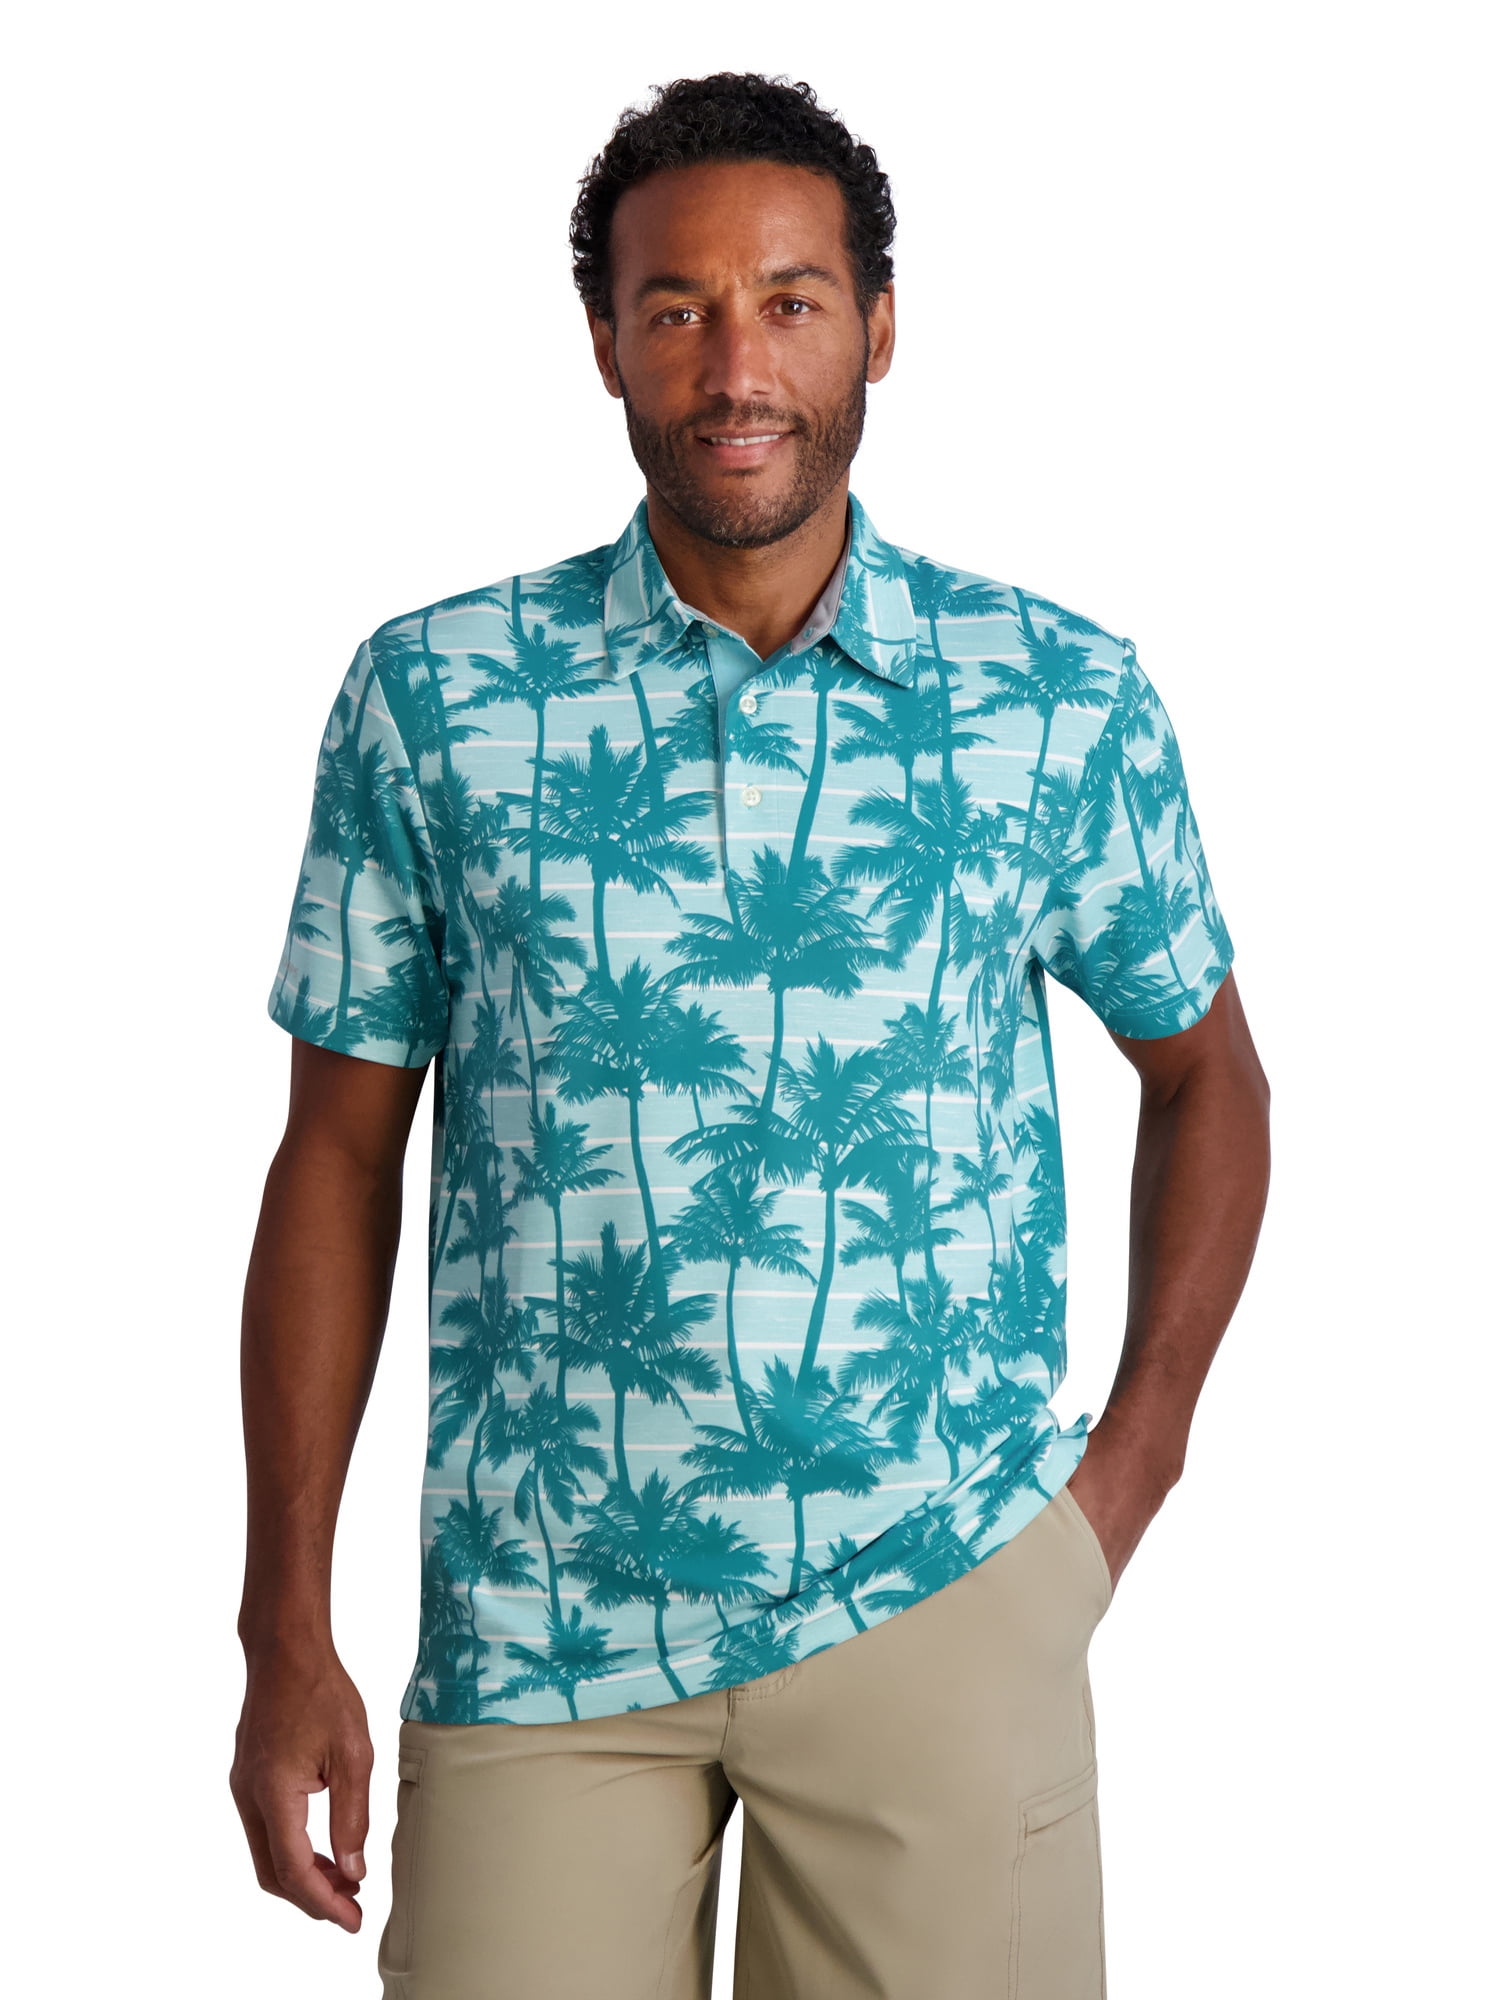 Chaps Men's Printed Golf Polo - Sizes S up to 3XL - Walmart.com